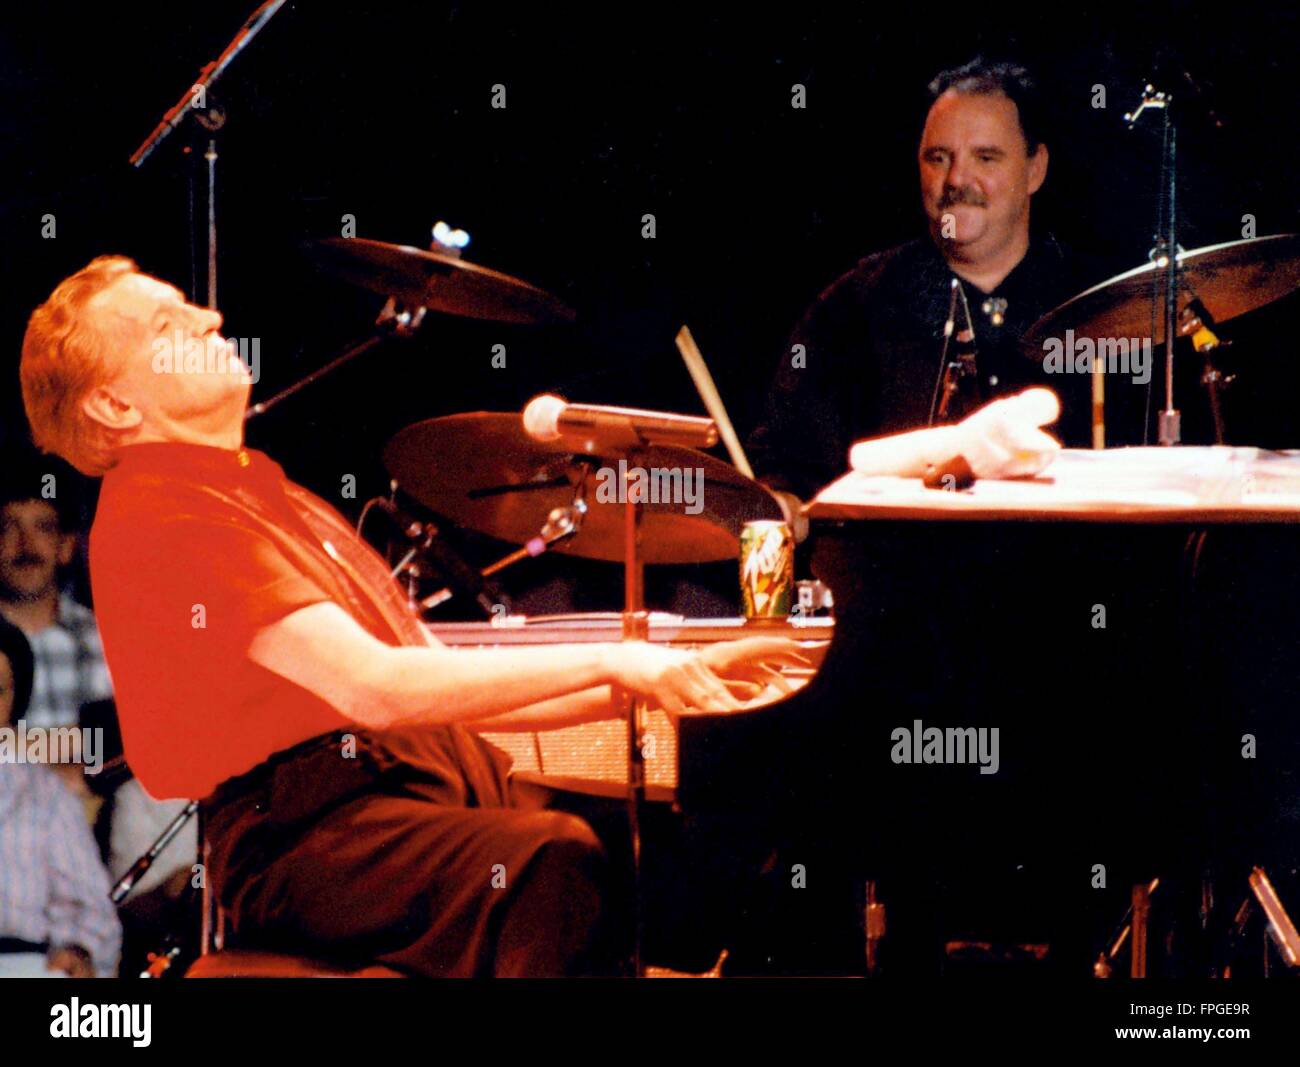 Jerry Lee Lewis performing at West Bury music fair in New York City 08 15 1998 Photo by Michael Brito Stock Photo